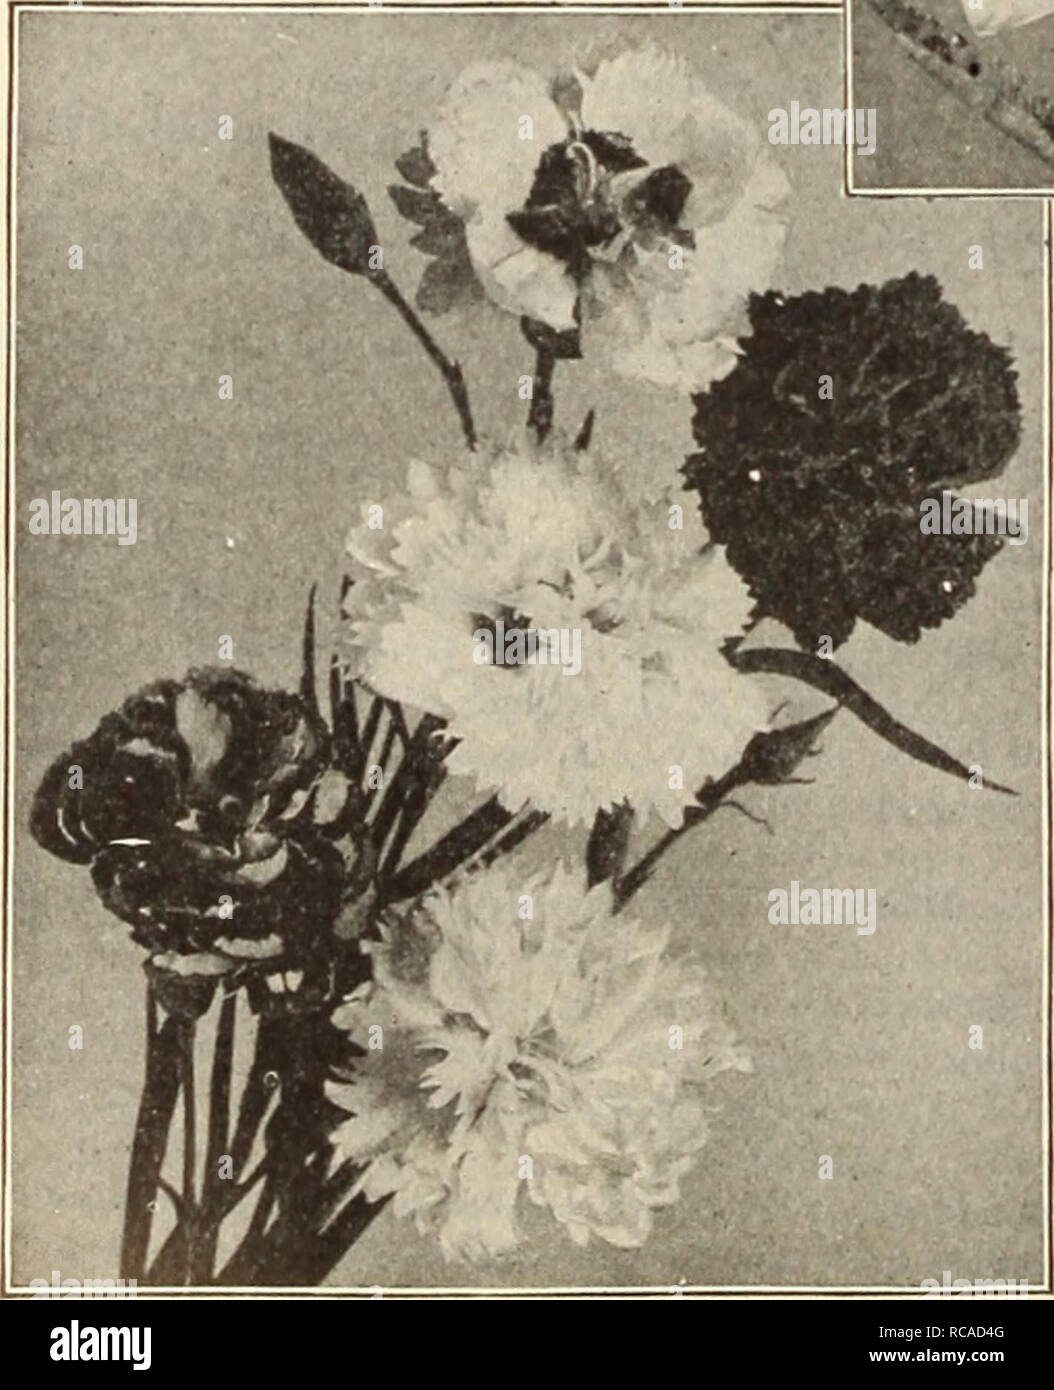 . Dreer's garden book : seventy-sixth annual edition 1914. Seeds Catalogs; Nursery stock Catalogs; Gardening Equipment and supplies Catalogs; Flowers Seeds Catalogs; Vegetables Seeds Catalogs; Fruit Seeds Catalogs. 208 iHEHRTADRftR-PhllAKLPHIAM'^HARDY PfR^nniAL PLANH- PHYSOSTEGIA (FaUe Dragon-Head). One of the most beautiful of our midsummer flowering perennials, form- ing dense bushes 3 to 5 feet high, bearing spikes of delicate tubular flowers not unlike a gigantic heather. (See cut.) Virginica. Bright but soft pink. — alba. Pure white; very fine. — Speciosa. Very delicate pink. 15 cts. each Stock Photo